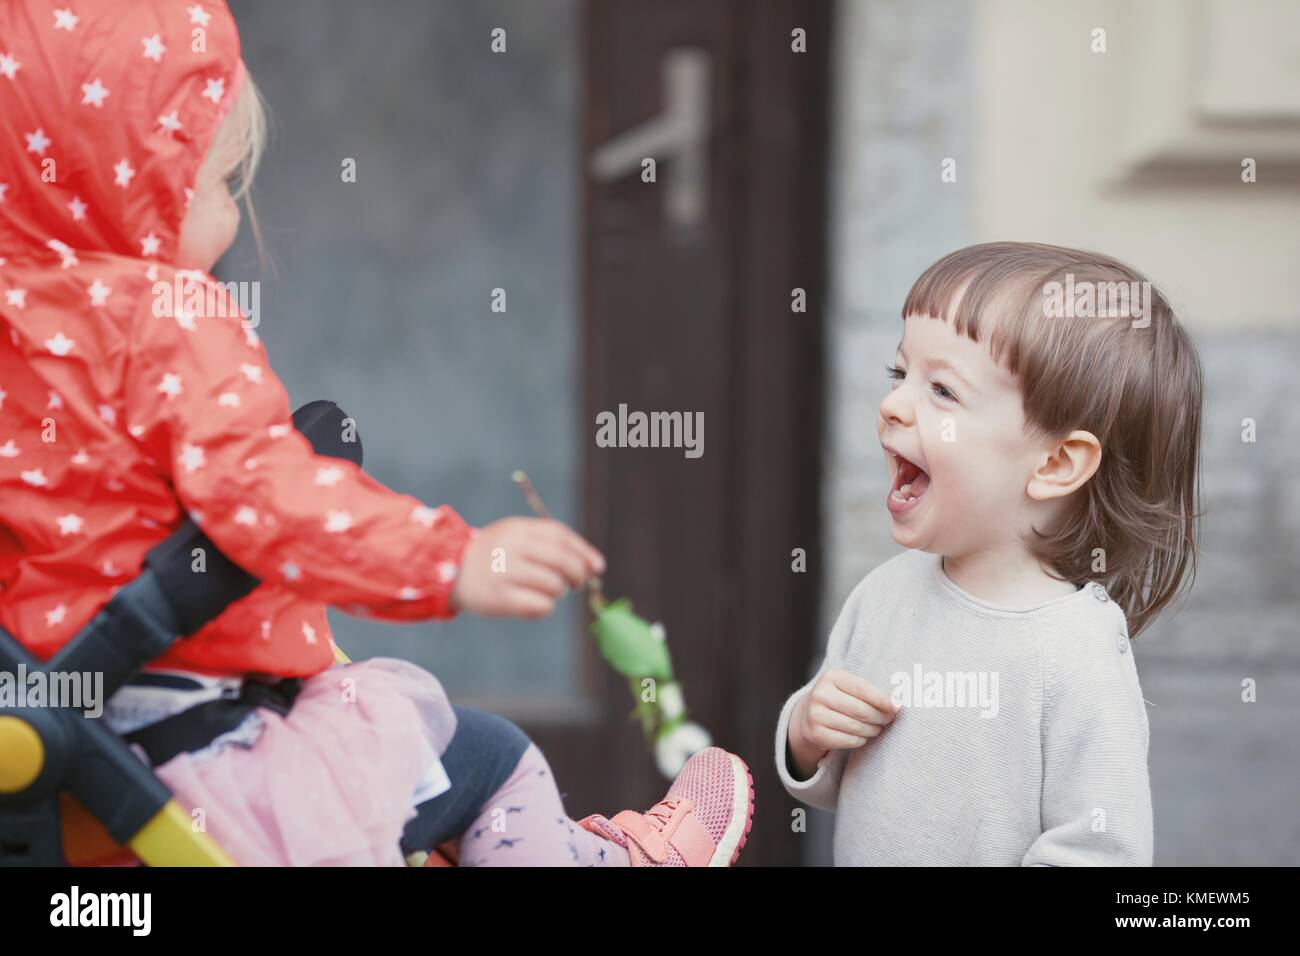 Happy kid with long blond hair playing with a little girl sitting in a baby stroller. Stock Photo